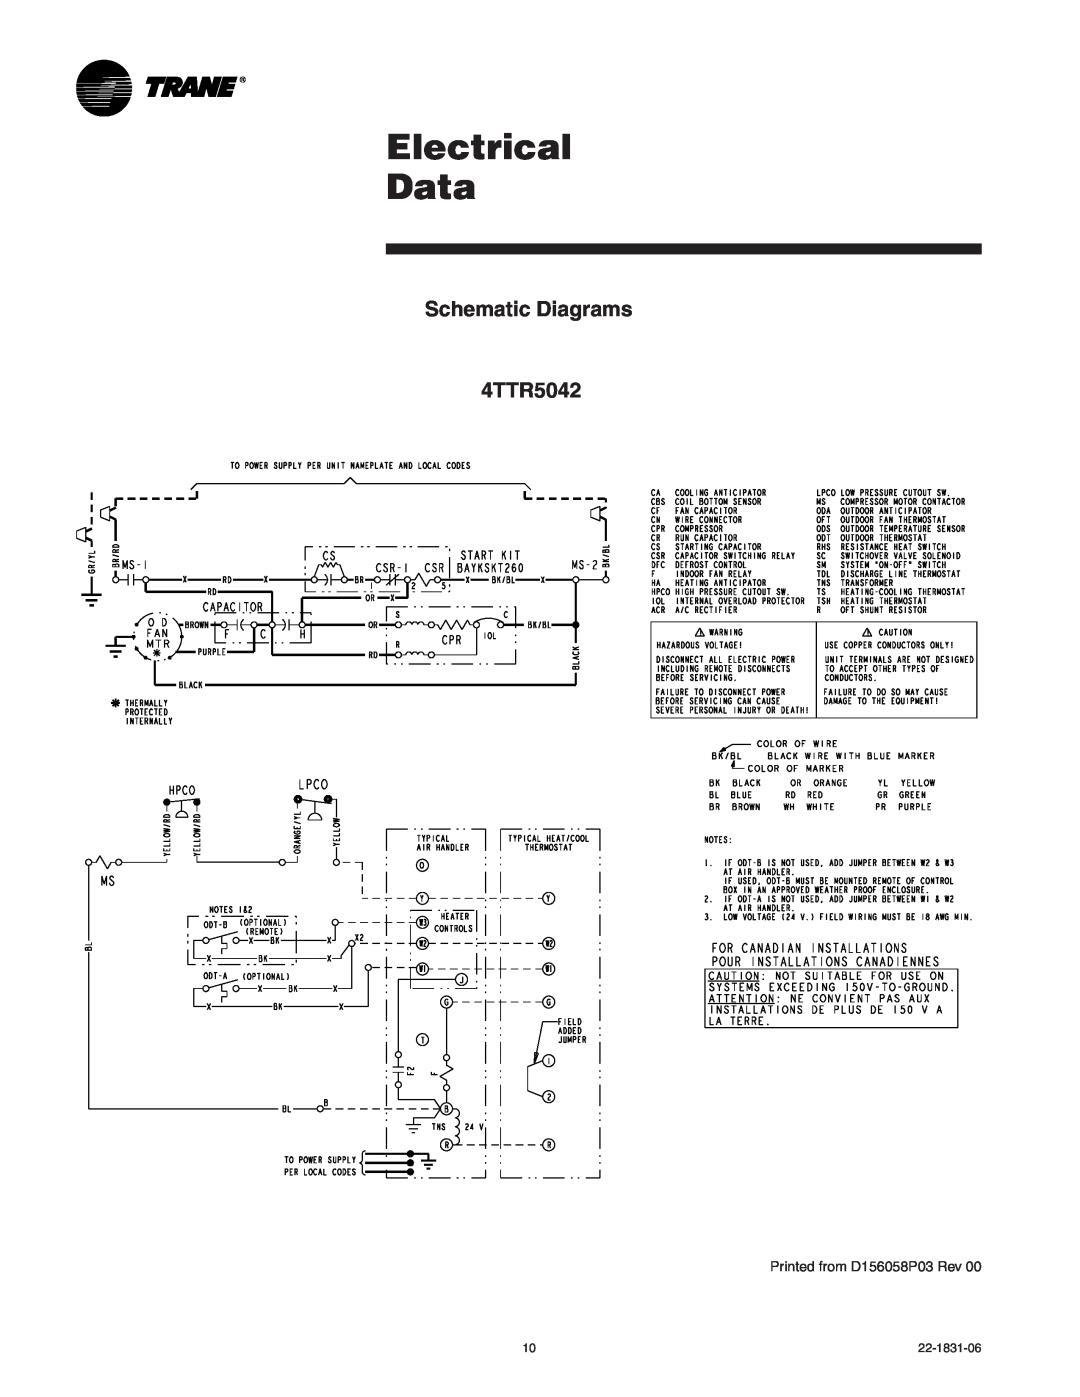 Trane XR15 manual Electrical Data, Schematic Diagrams 4TTR5042, Printed from D156058P03 Rev 